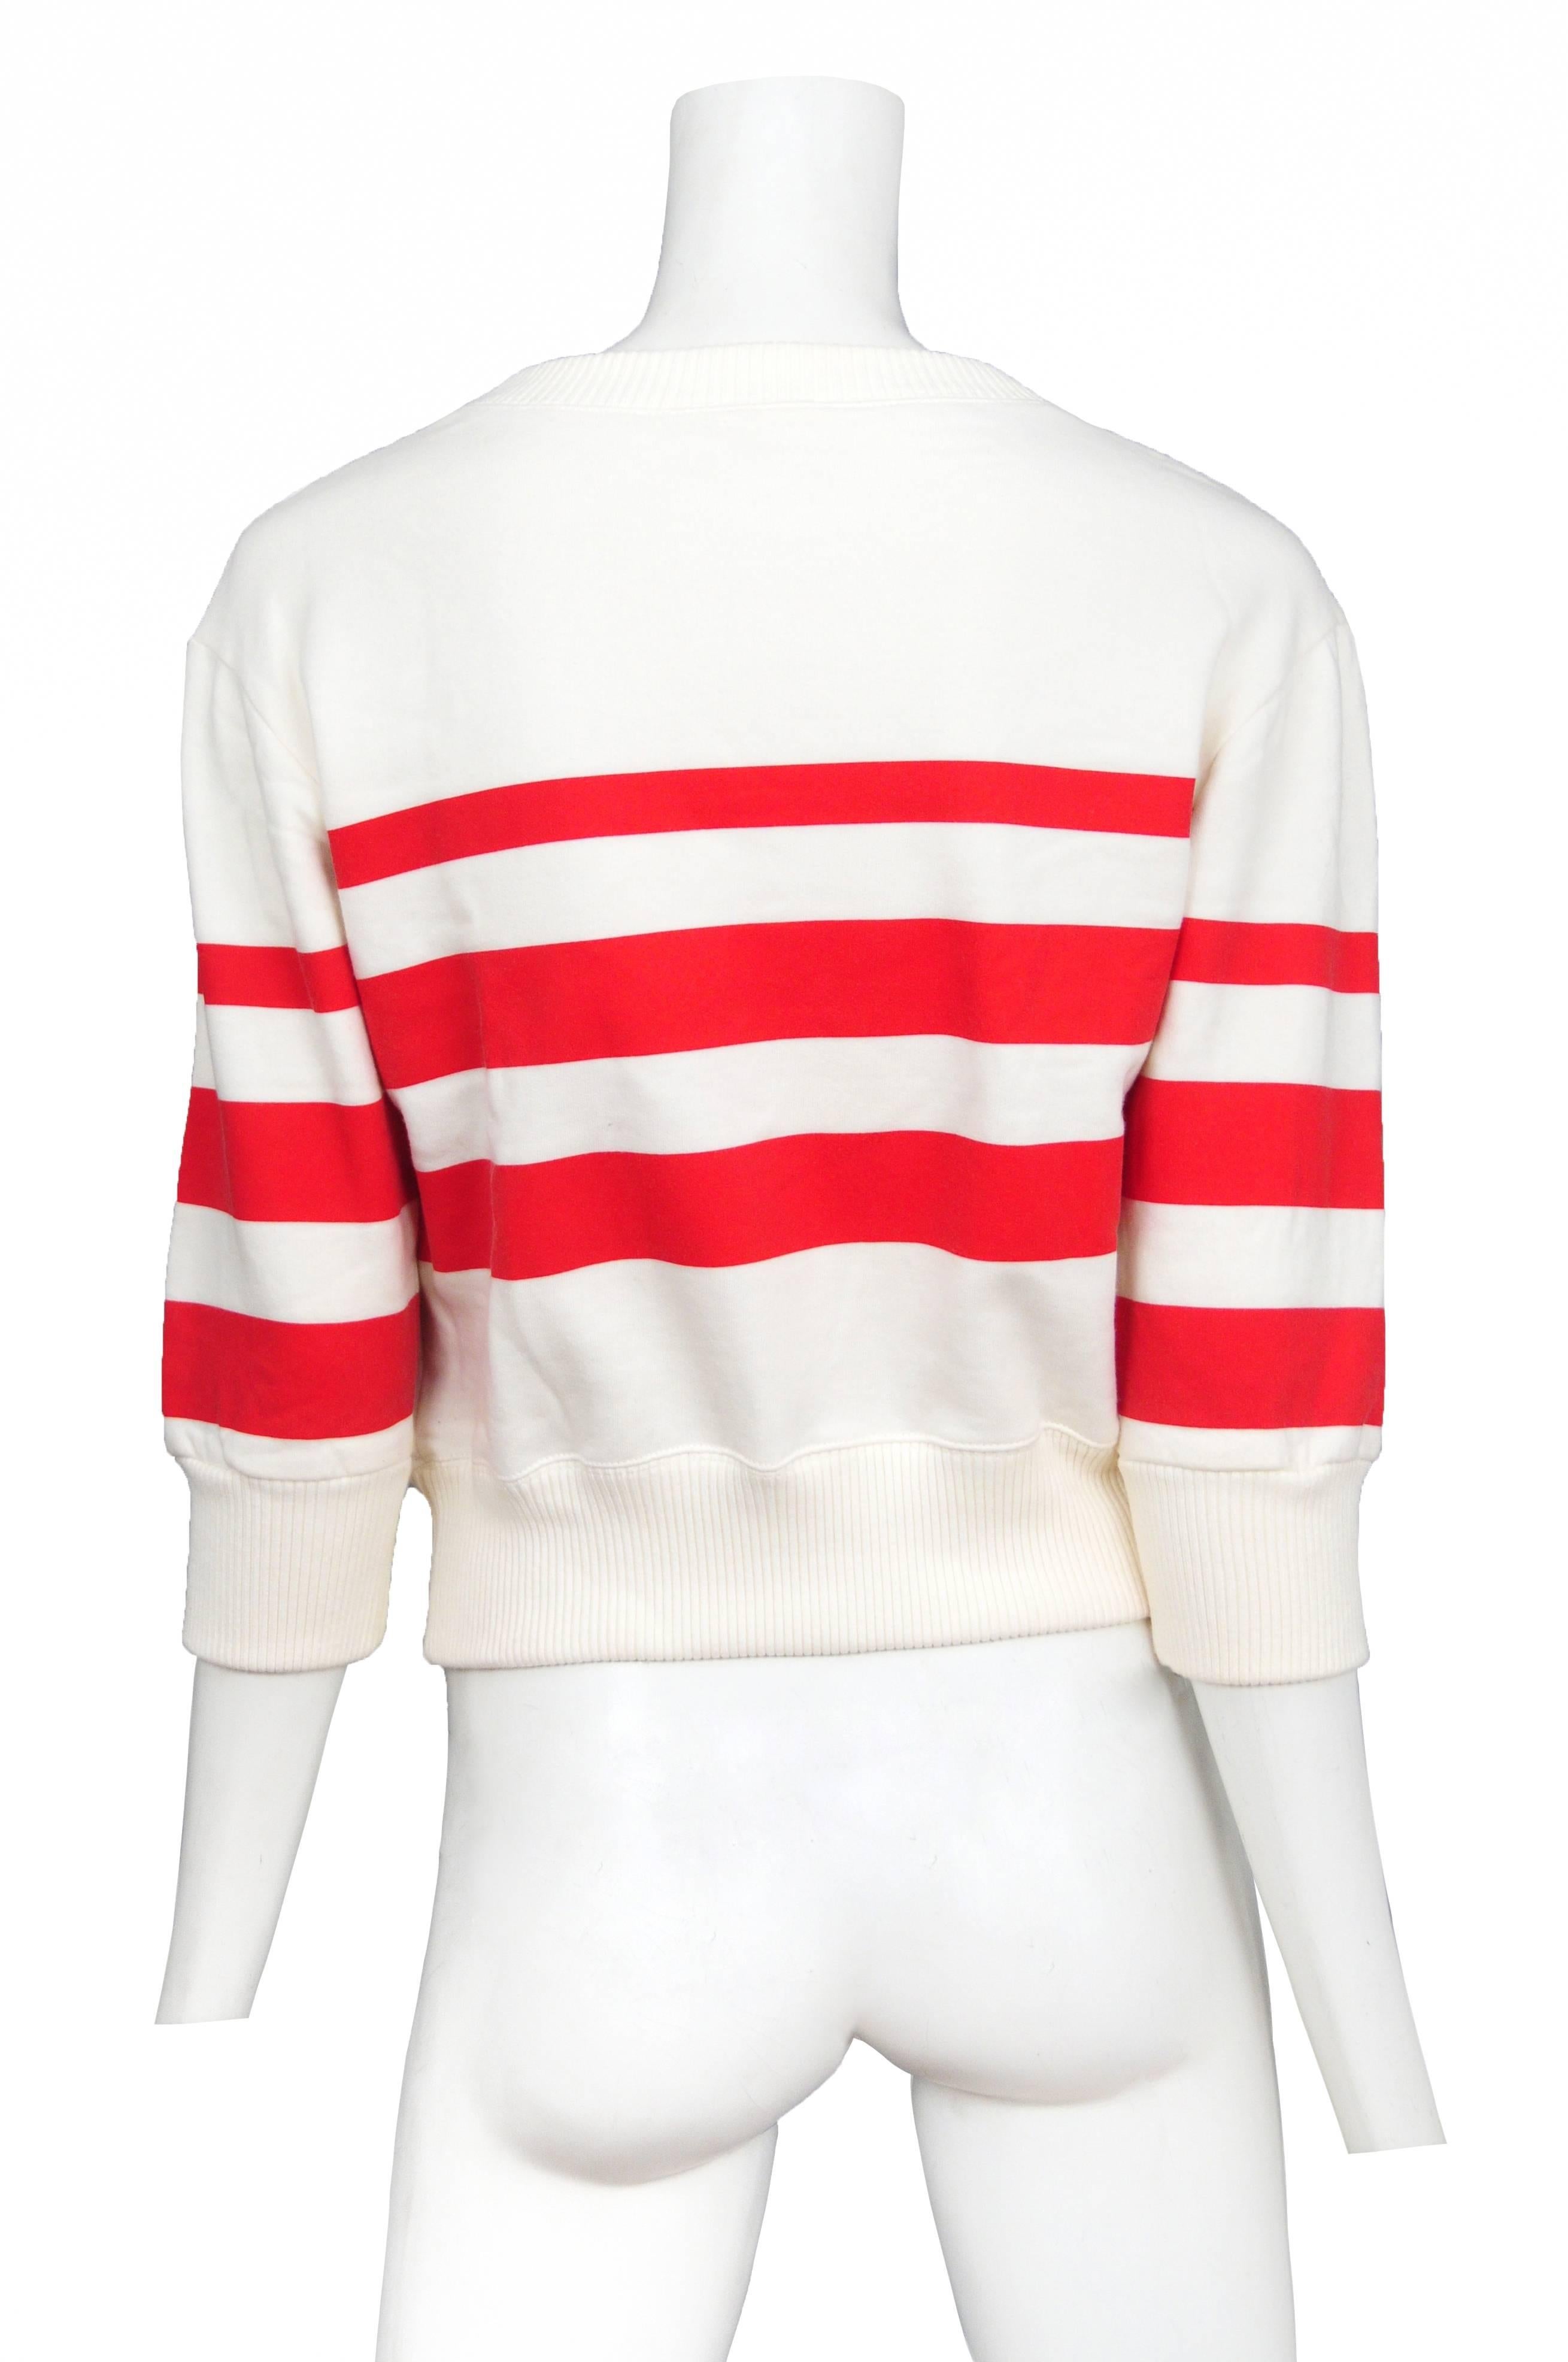 Vintage Chanel Pop Art sweatshirt featuring red and white striped sleeves and a multicolor print of Coco Chanel on the front with a thought bubble reading 